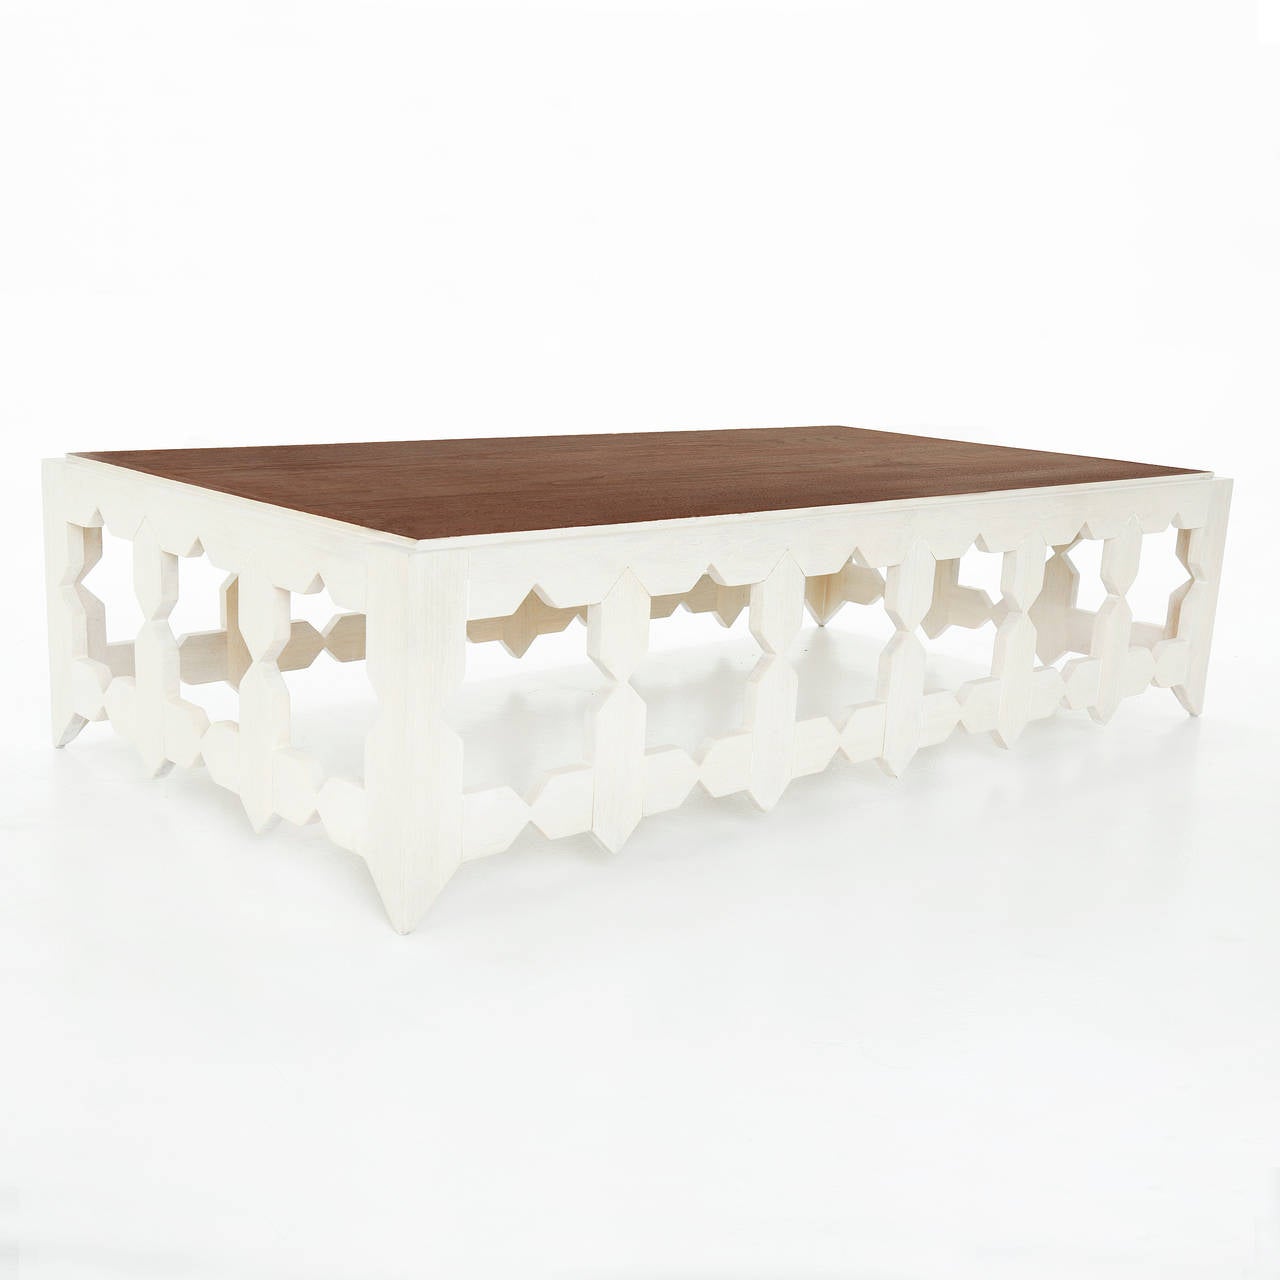 American Rectangular Walnut Coffee Table with Star Cut-Outs